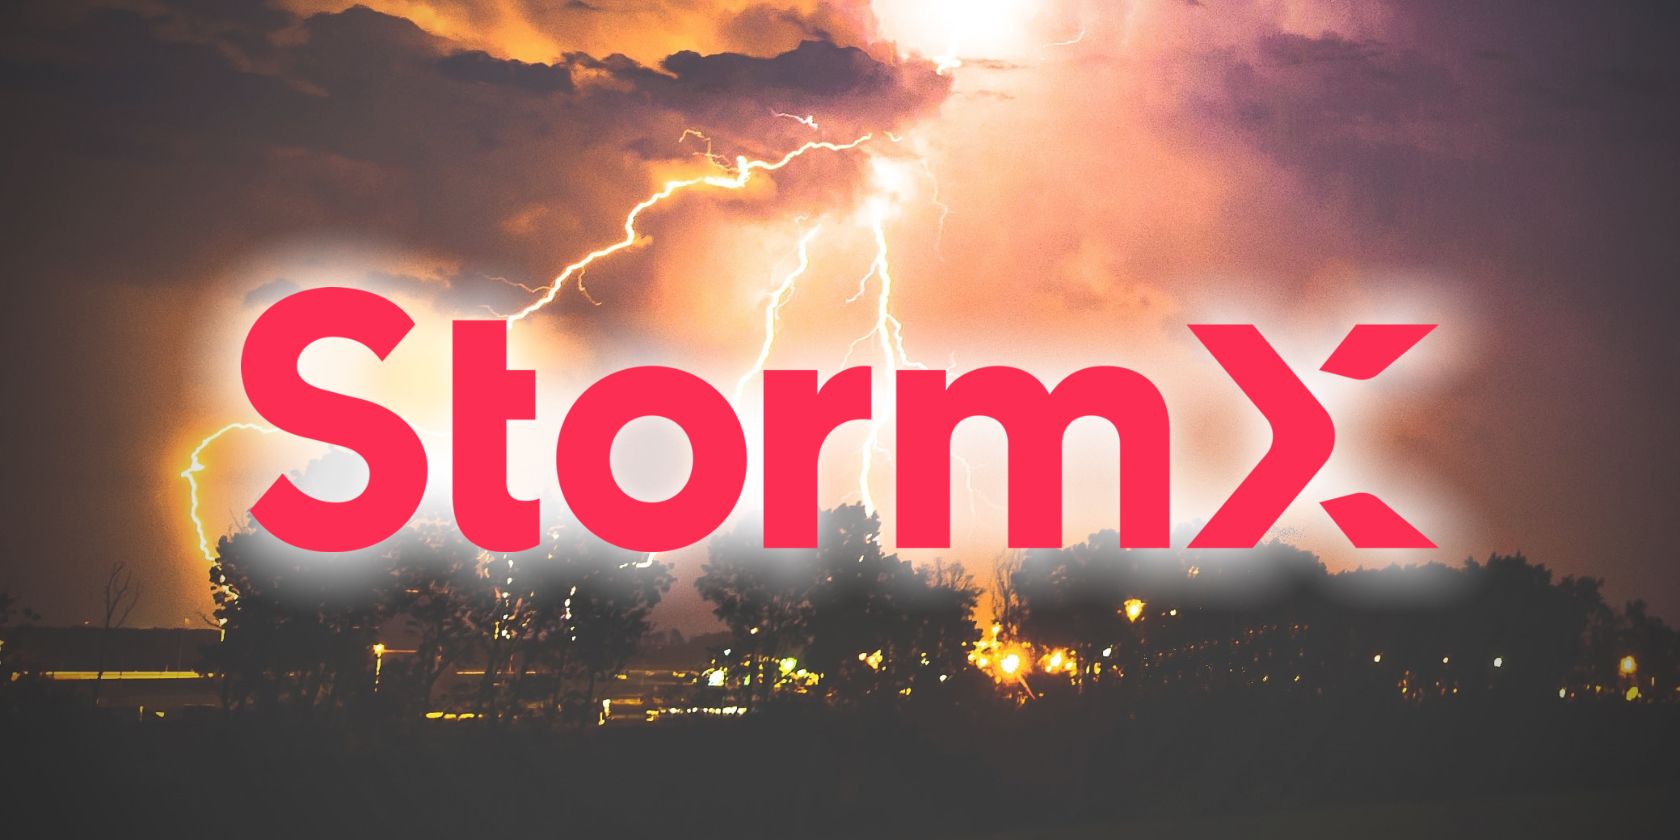 stormx logo on storm background feature